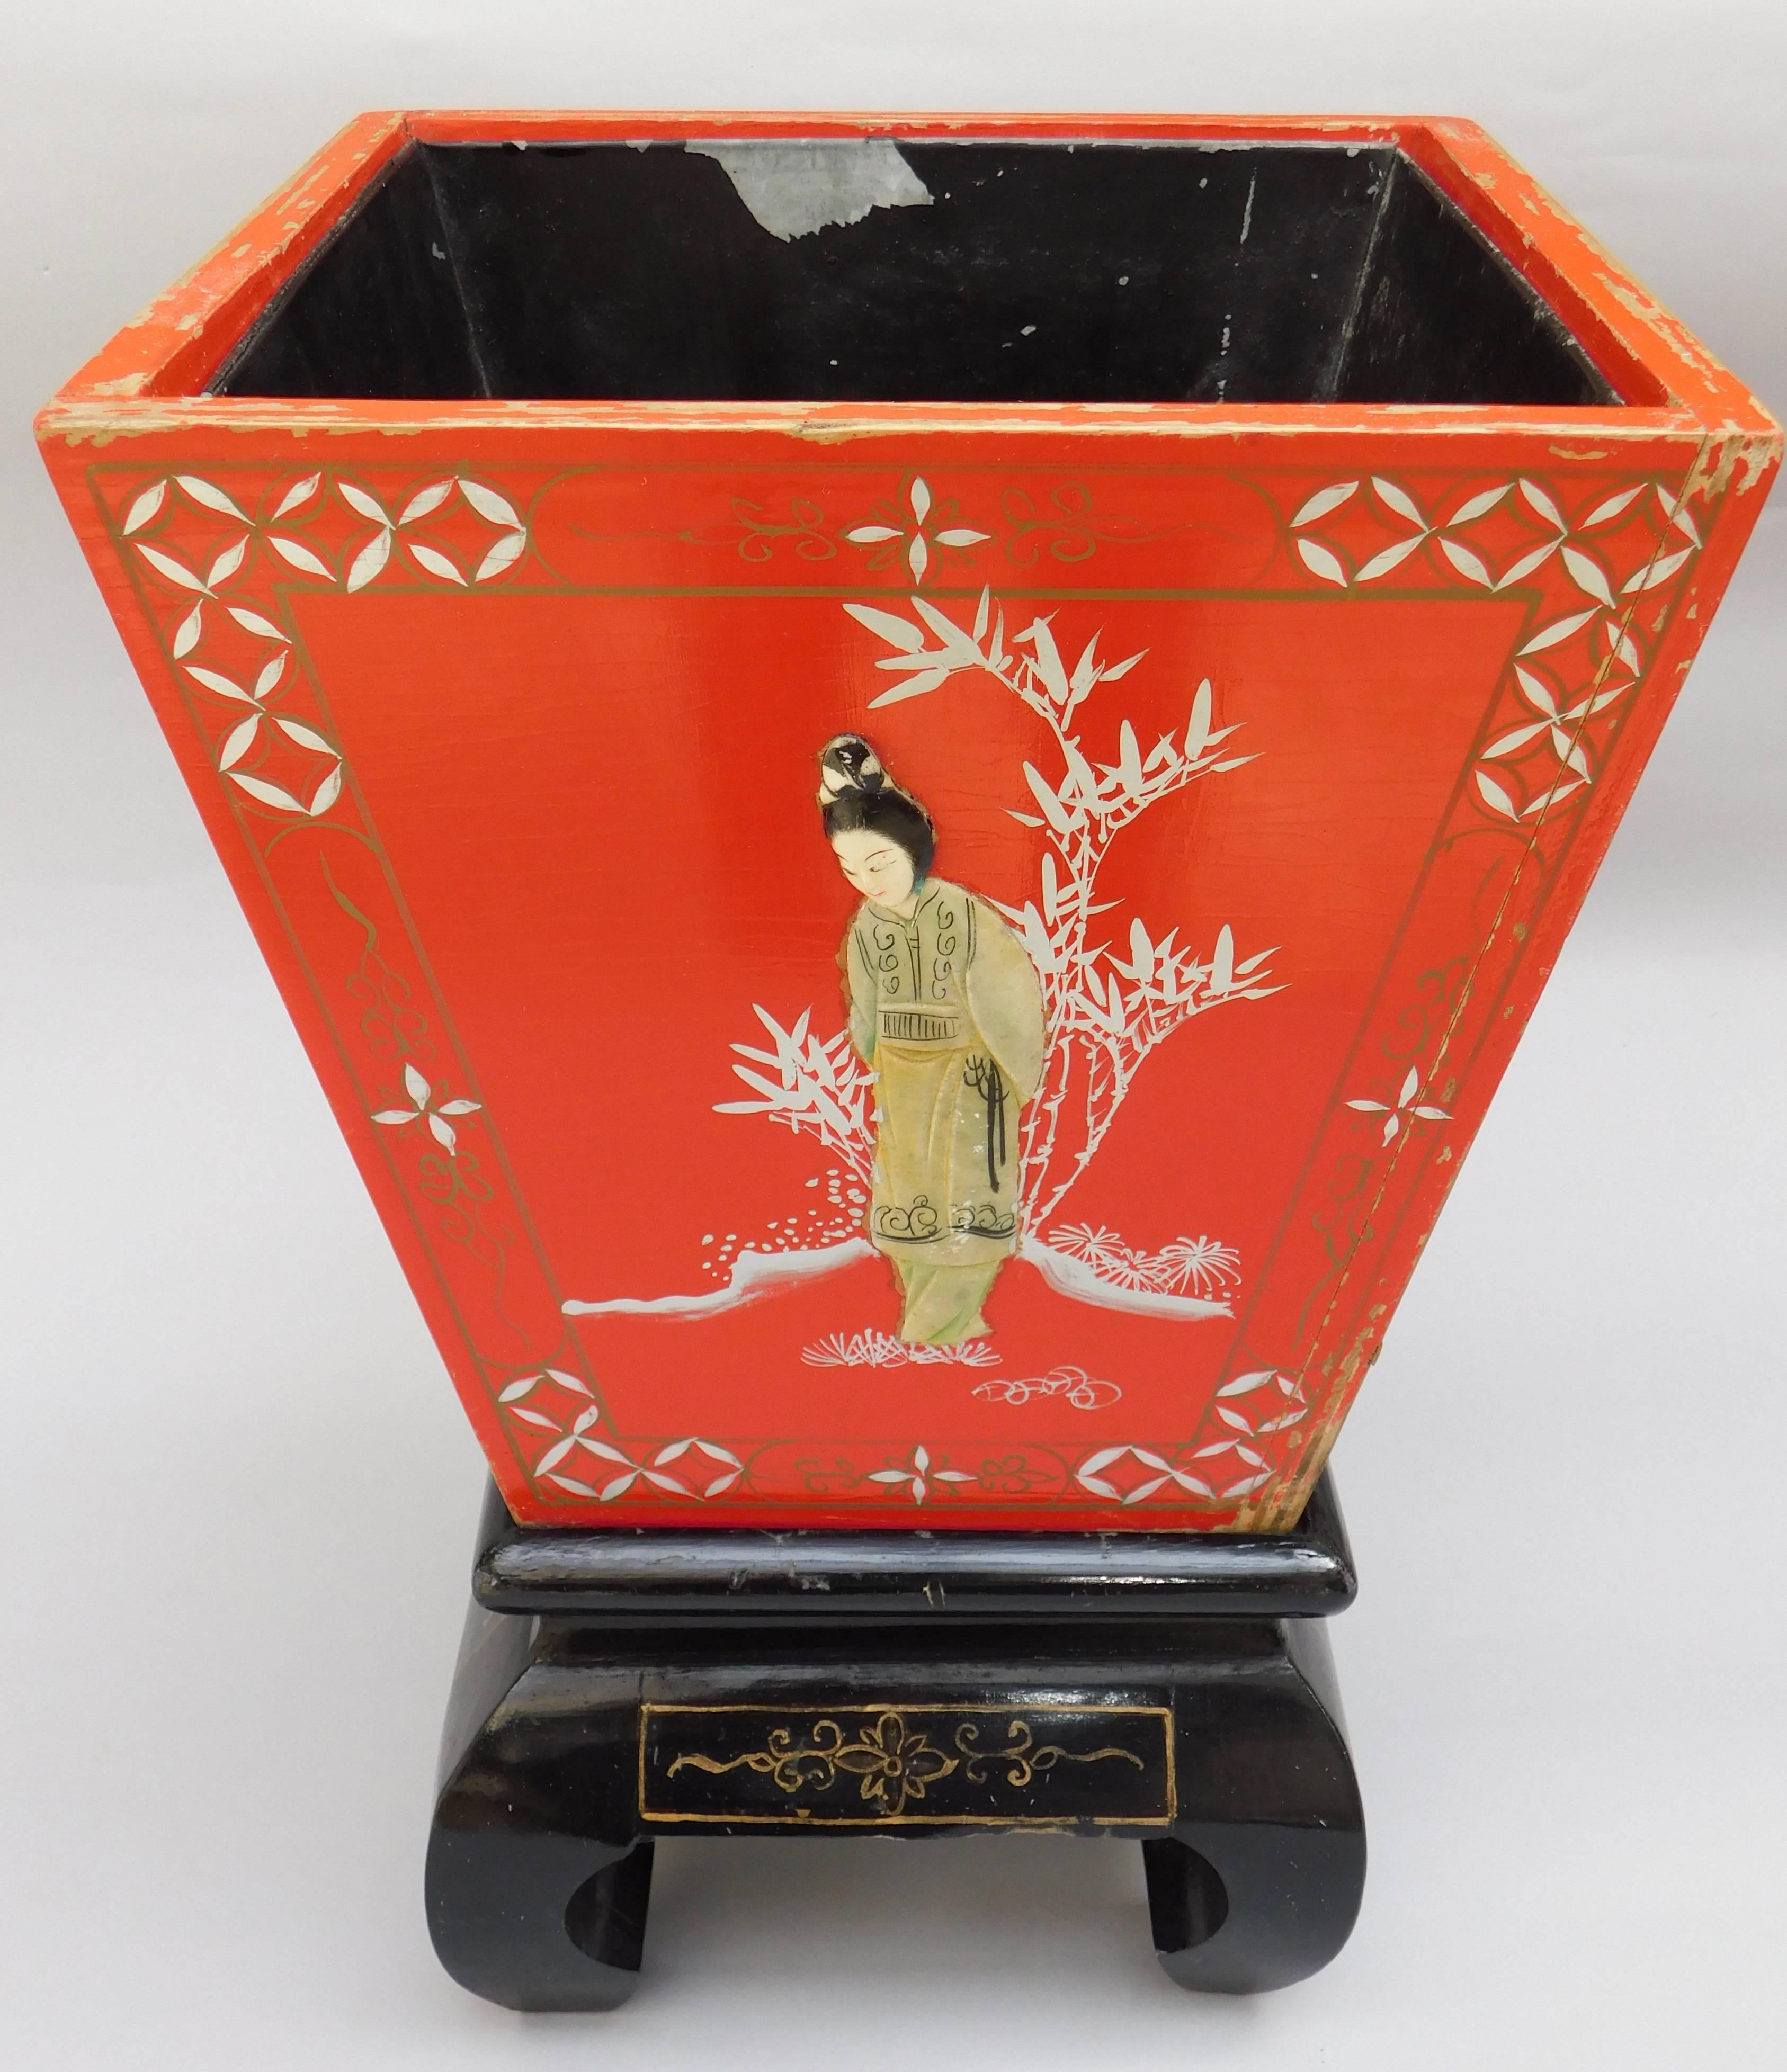 Chinese export red lacquered wood container on stand with a lift-out tin liner, circa 1960. Chinoiserie painted decoration with applied figures of ladies hand carved in soap stone.
Originally meant to be used as a planter, but I think it would make